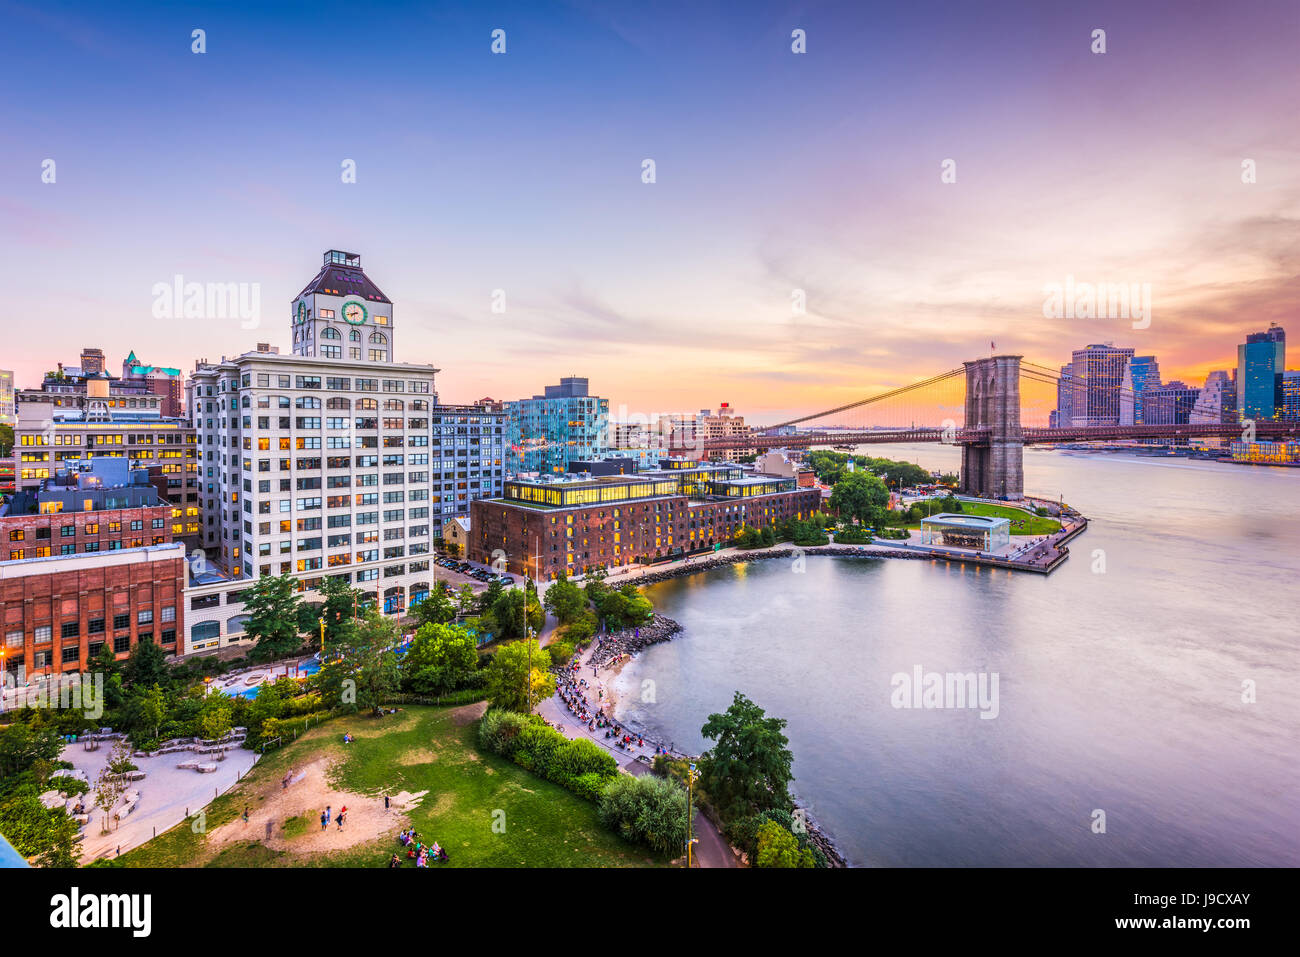 New York City financial district skyline at sunset over the East River. Stock Photo